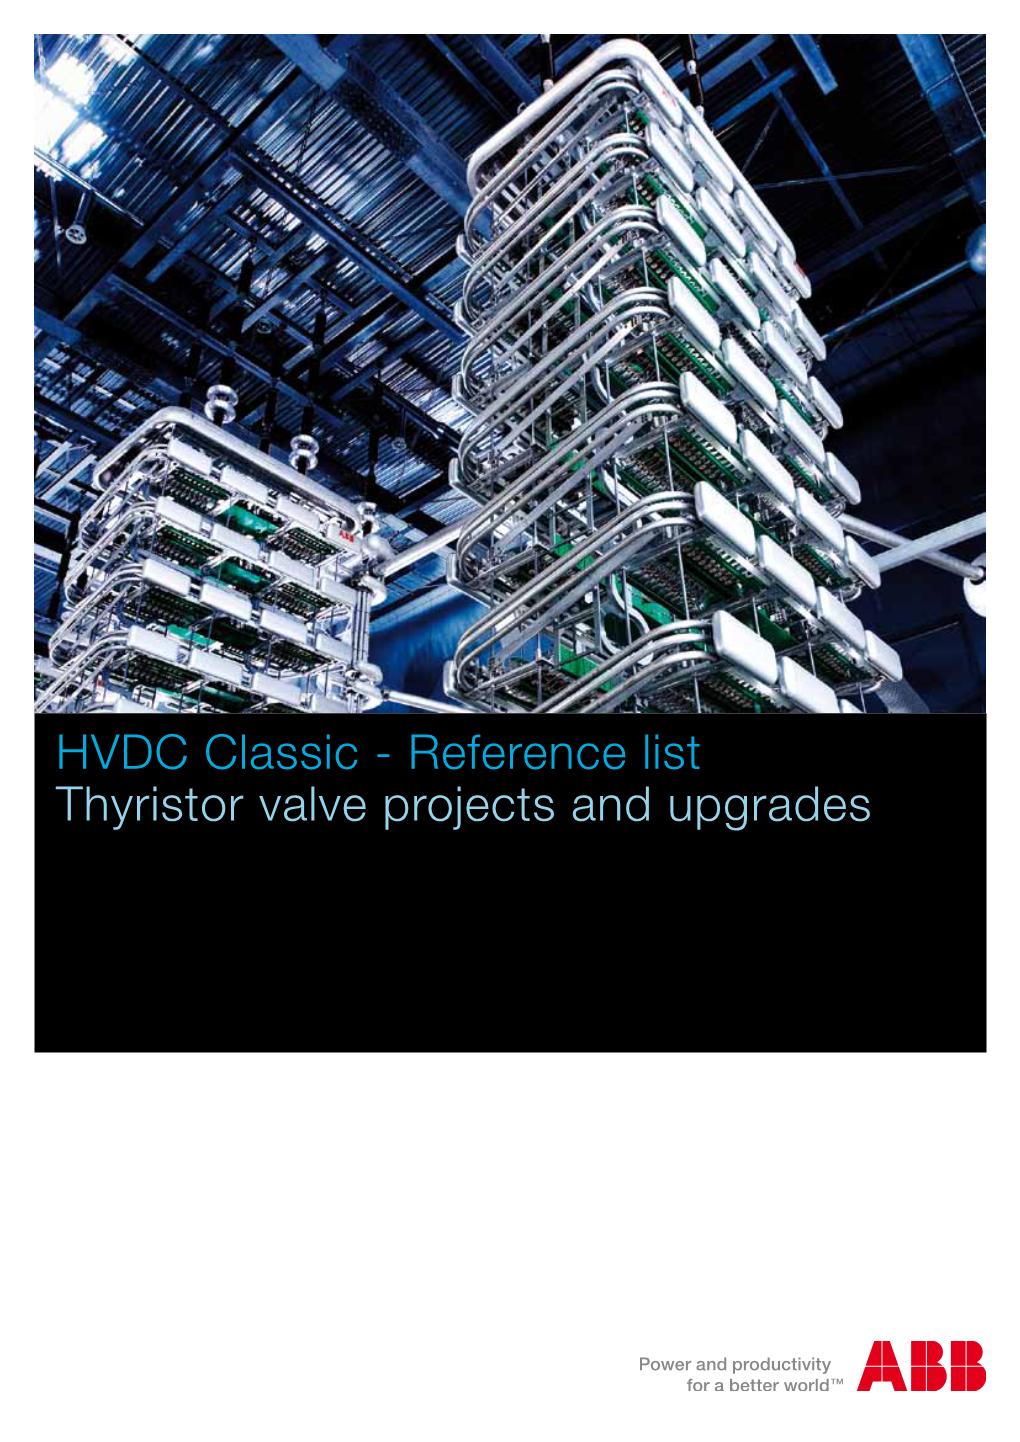 HVDC Classic - Reference List Thyristor Valve Projects and Upgrades ABB HVDC Classic Projects Worldwide Thyristor Valve Projects and Upgrades